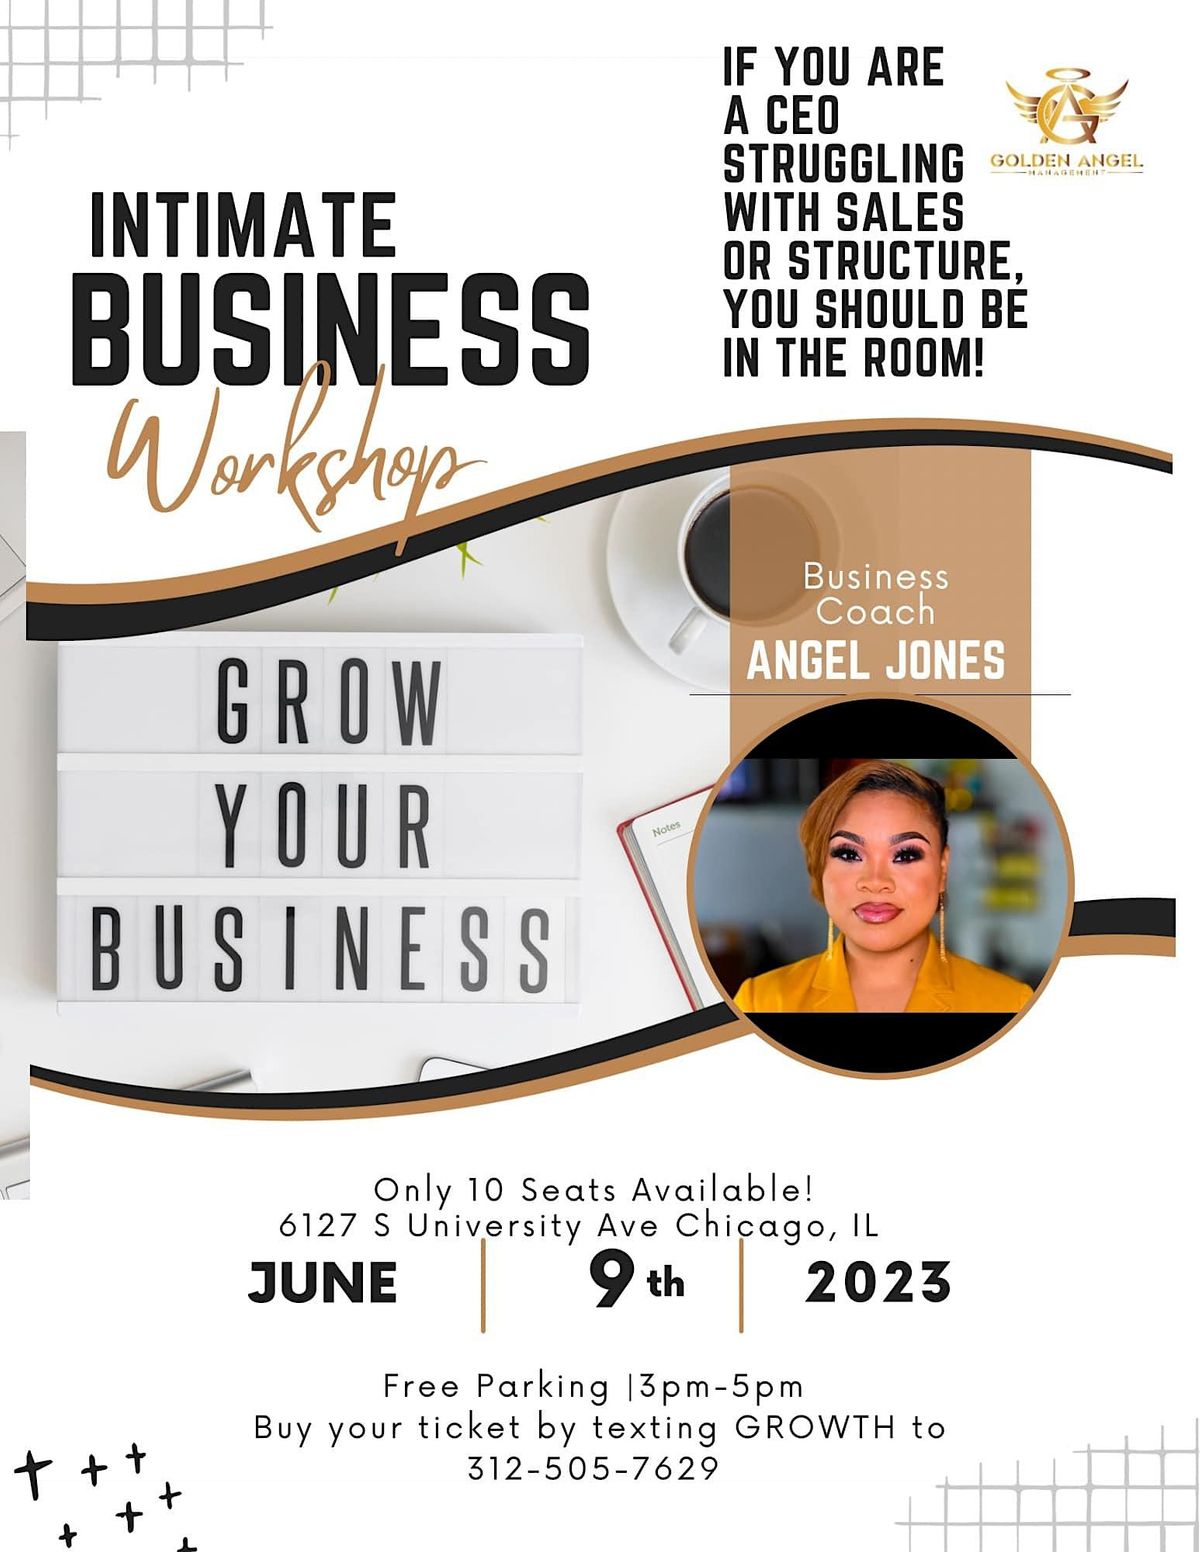 Intimate Business Workshop